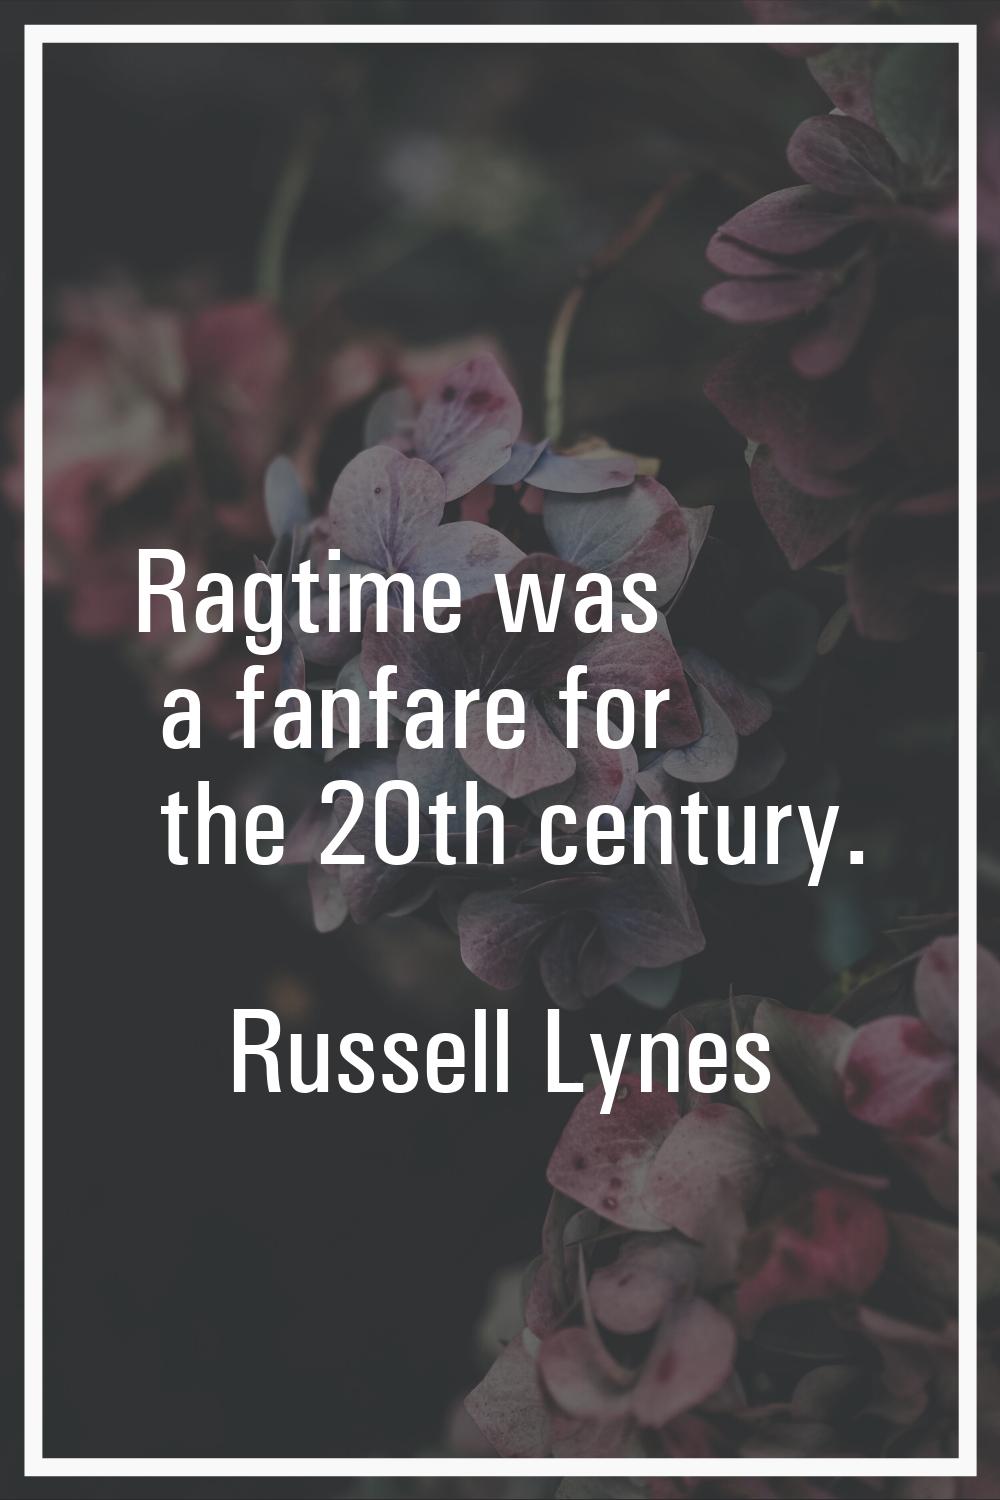 Ragtime was a fanfare for the 20th century.